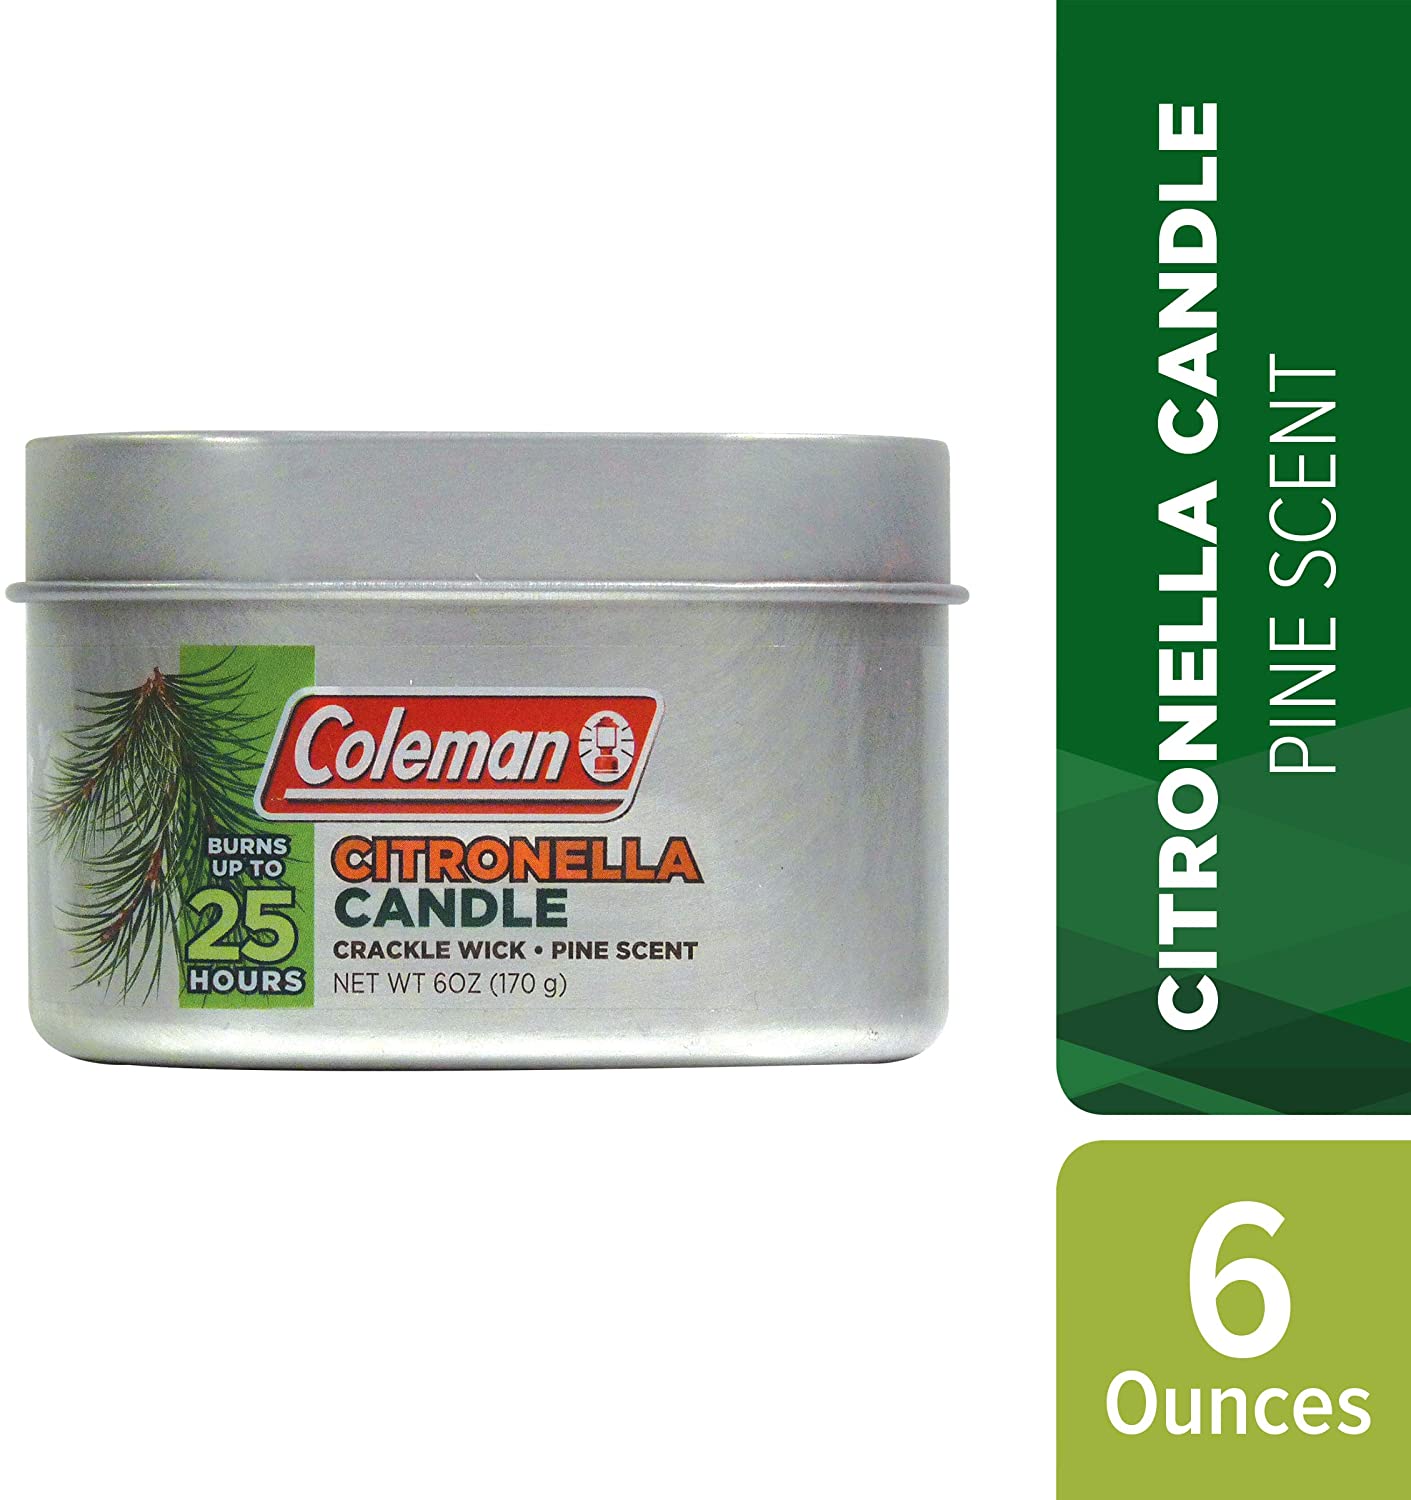 6-Ounce Coleman Scented Citronella Candle Wooden Crackle Wick (Pine Scent) $2.95 + Free Shipping w/ Prime, Walmart+, or $25+